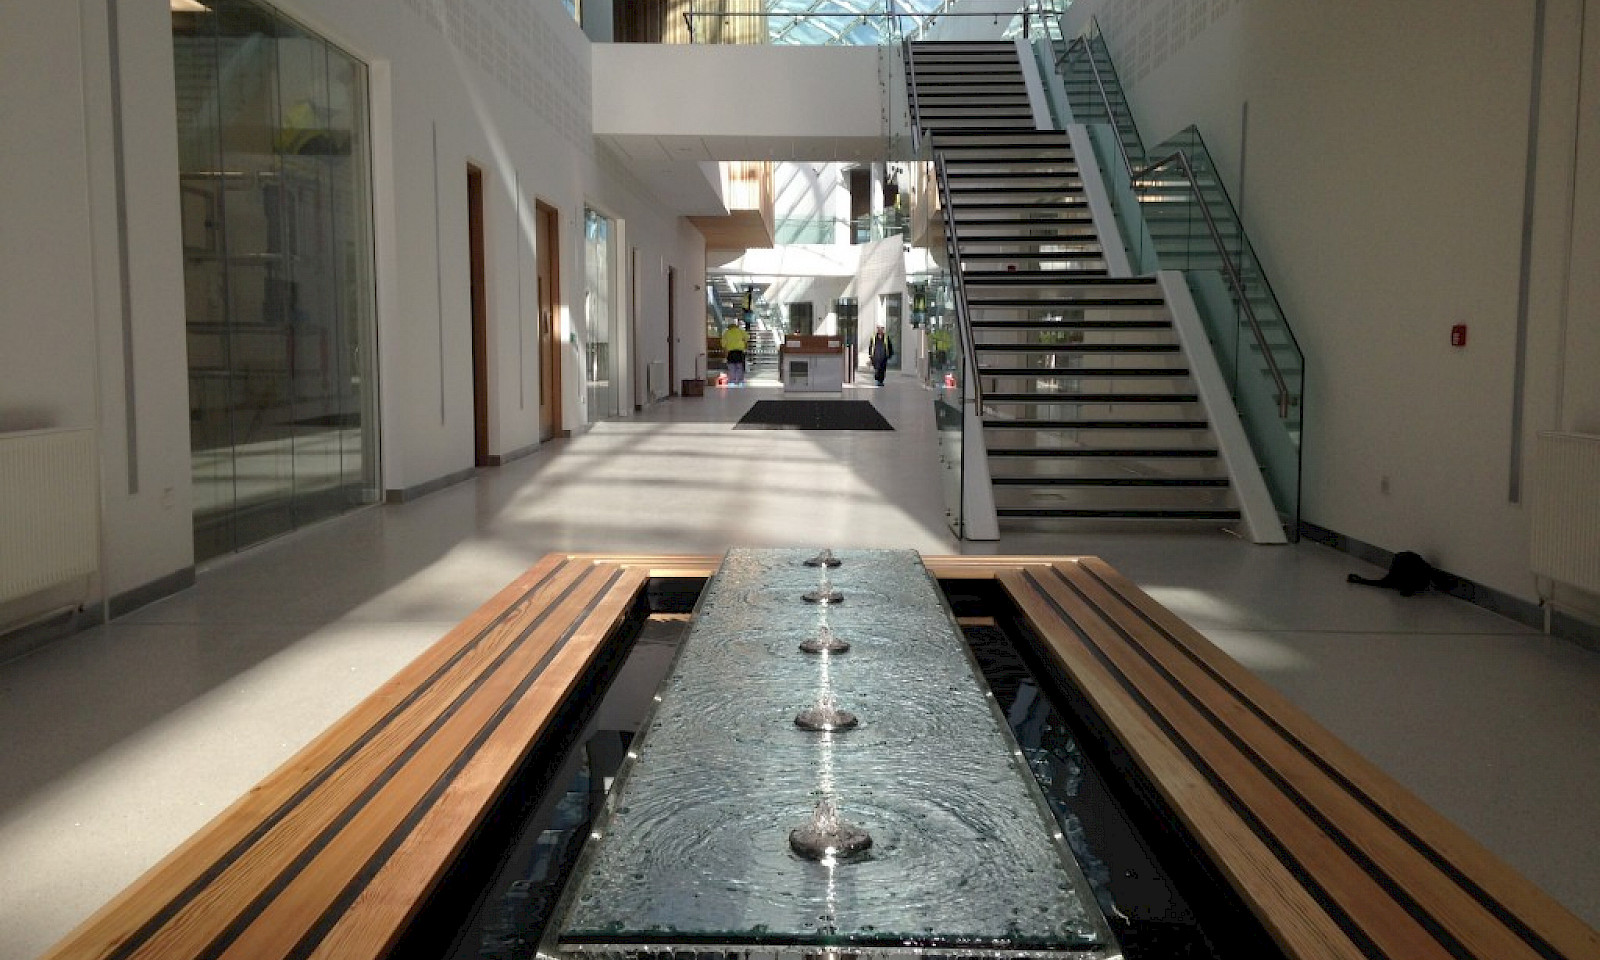 Waters Interior Water Feature image